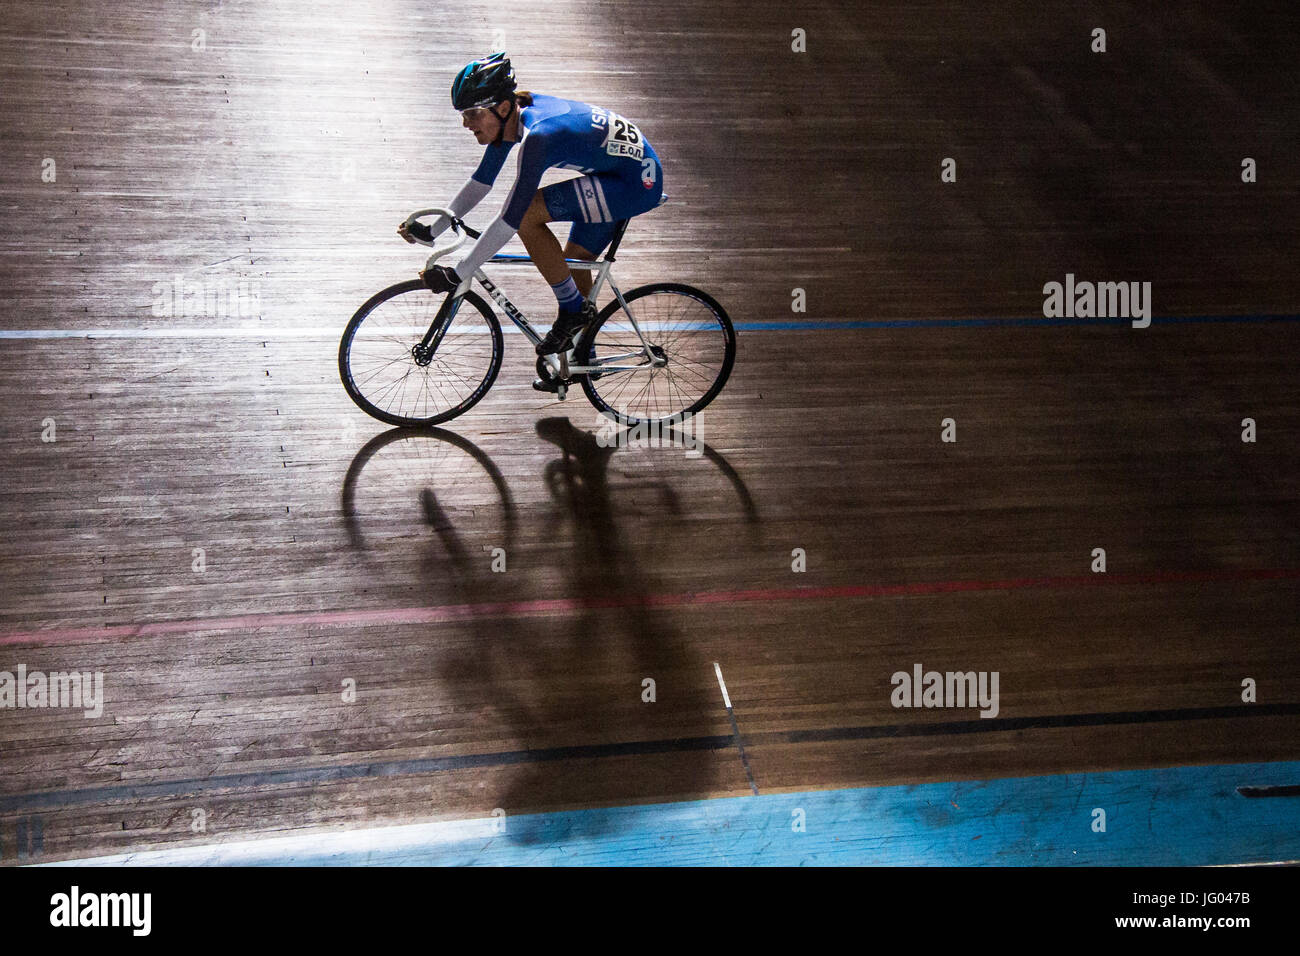 Israel's Wolfin Keren is seen during the Athens Track Grand Prix 2017. The tournament took place in Athens Olympic Velodrome under the Balkan Track Championships 2017 schedule.   Photo: Cronos/Kostas Pikoulas Stock Photo